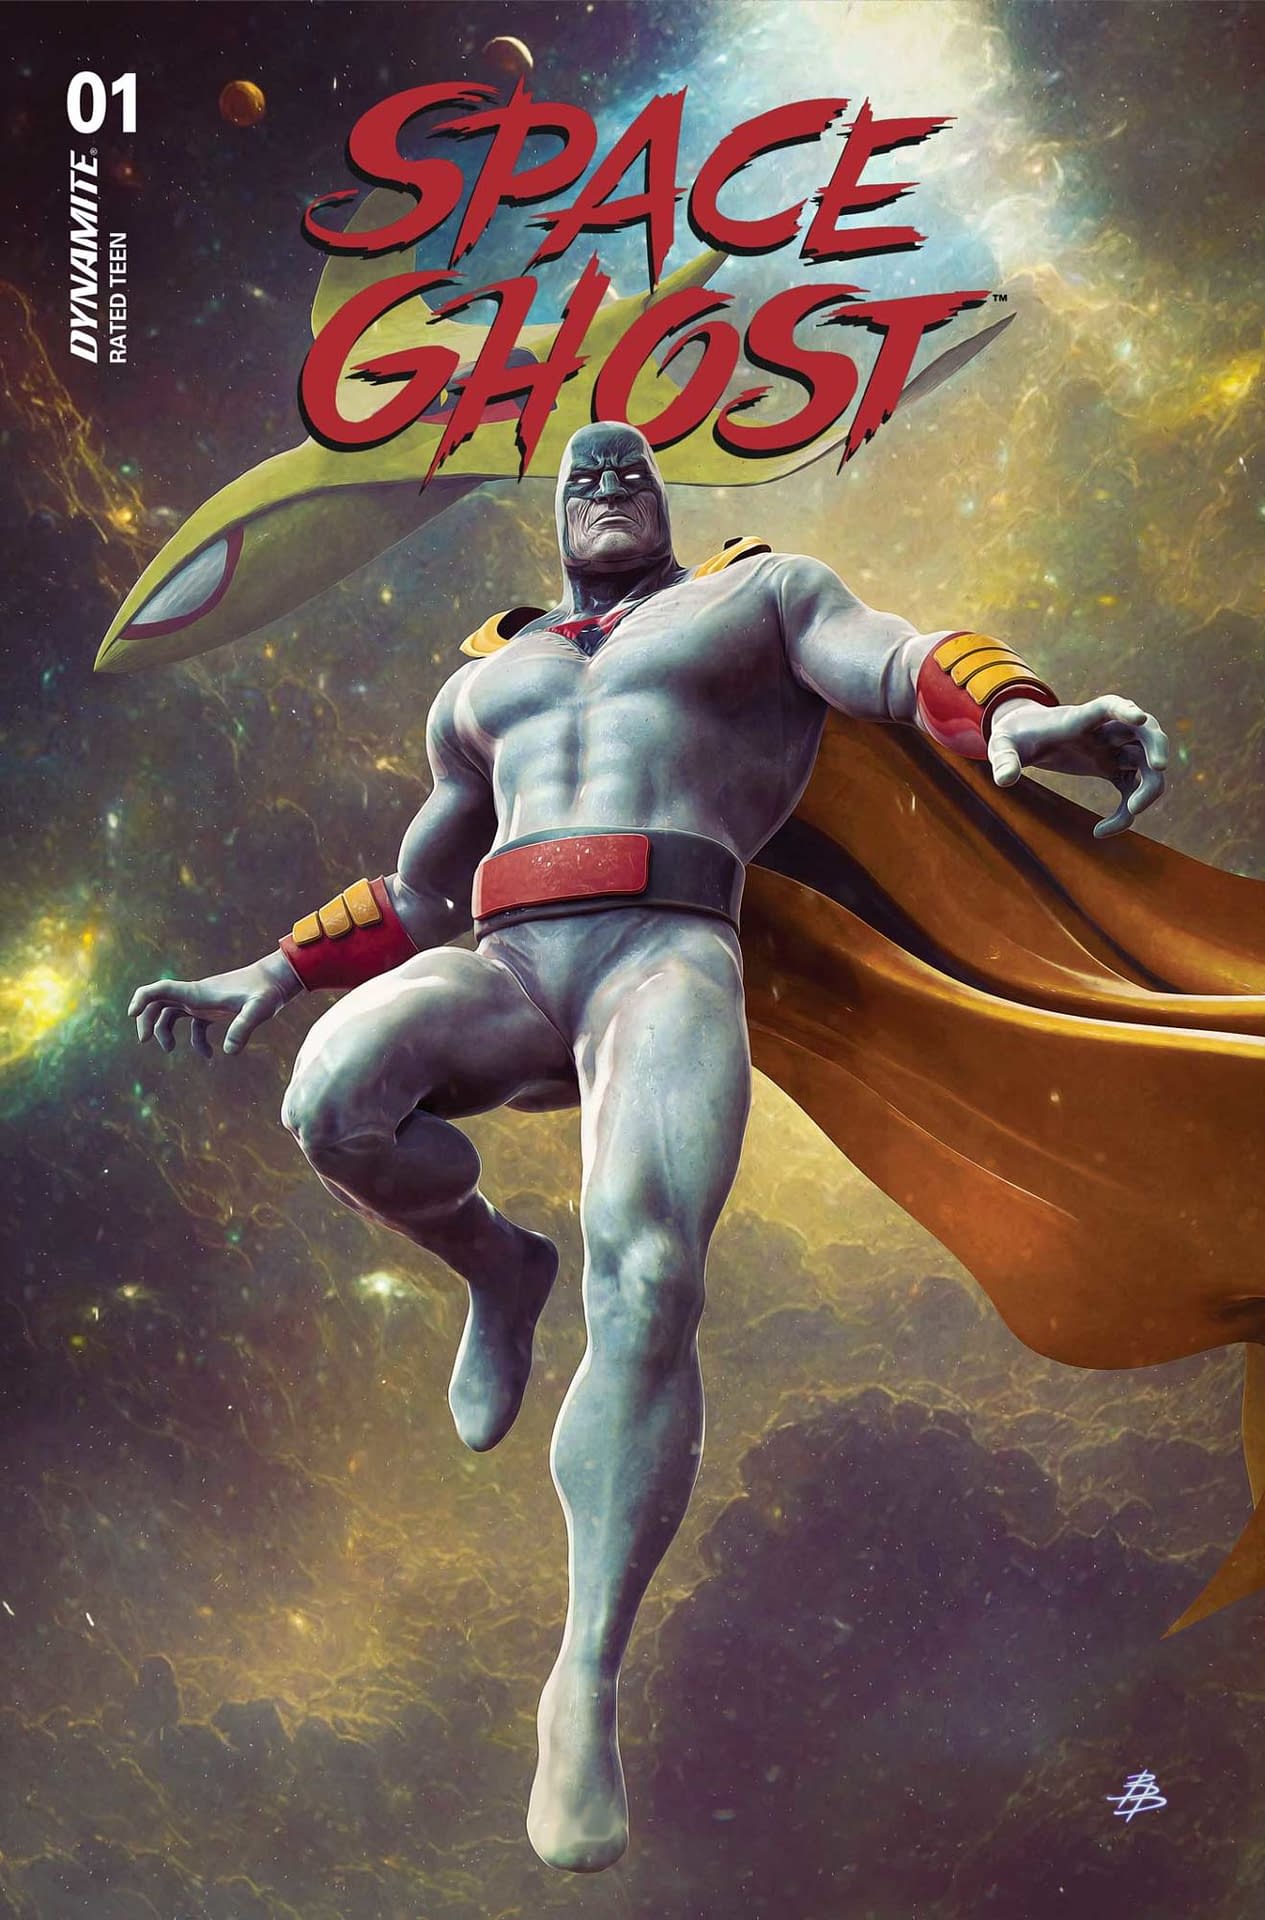 Space Ghost #1 Now Has Orders Of 67,135, Still Not Enough For Dynamite